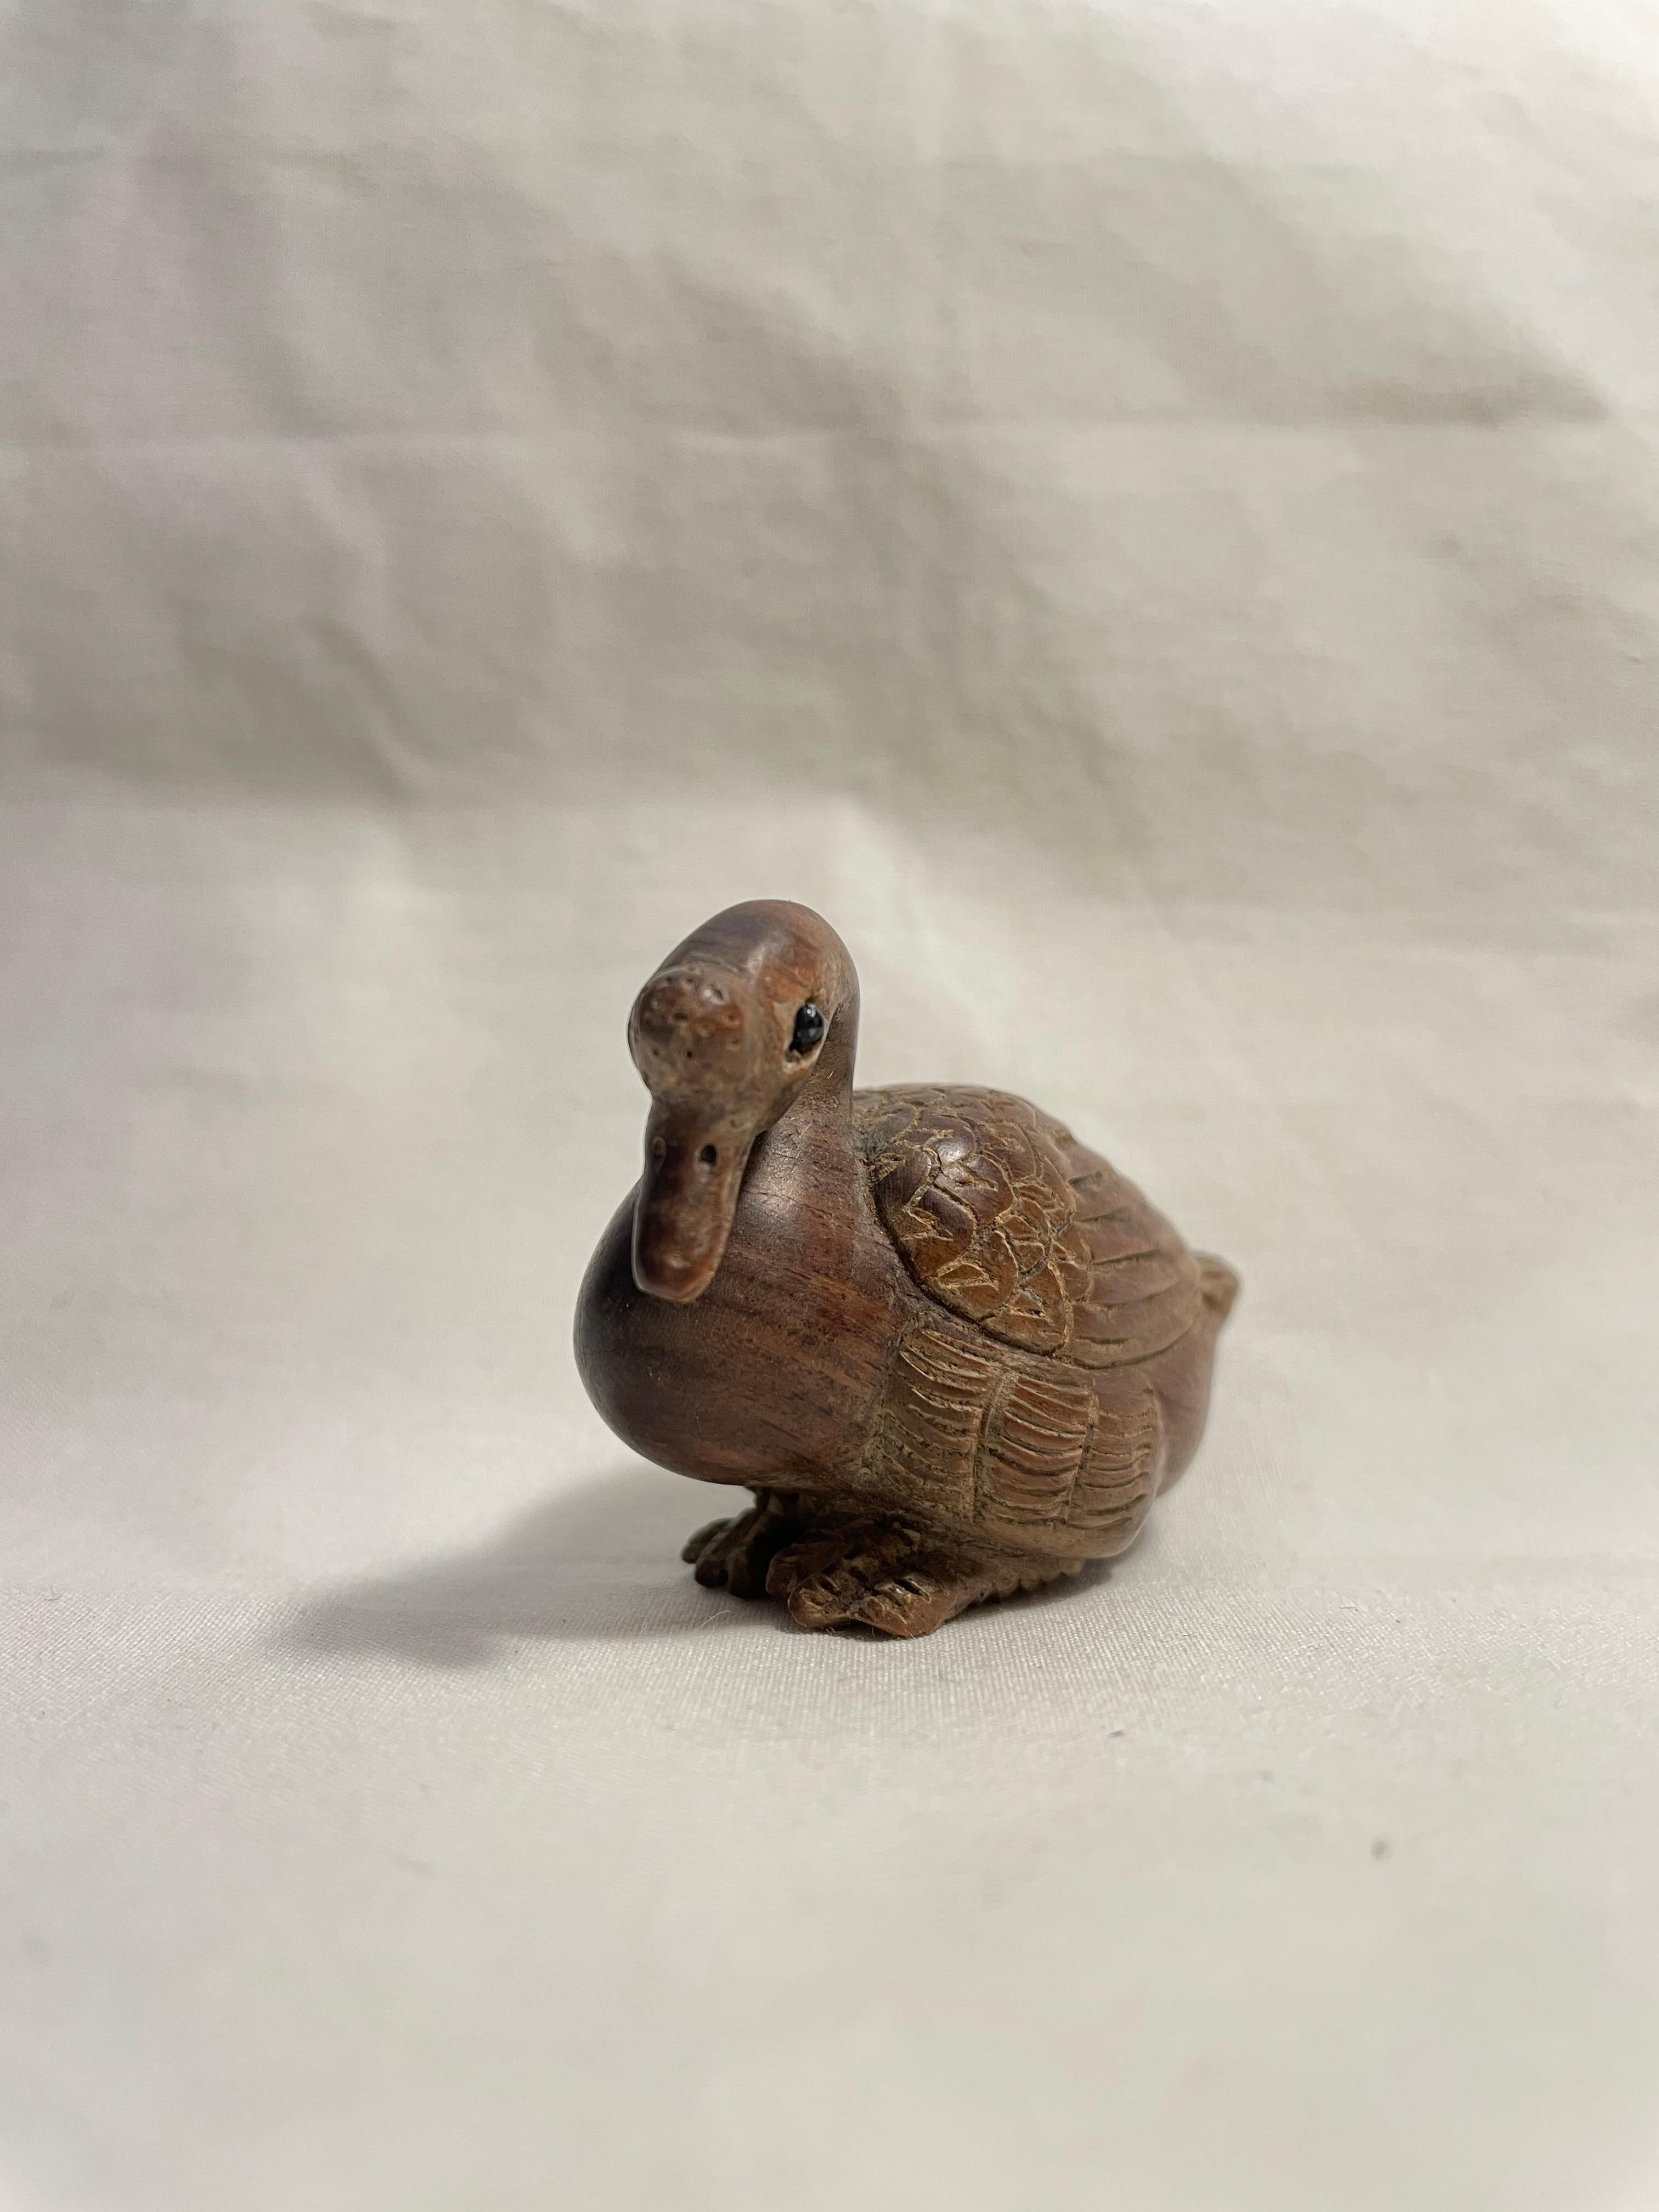 This is an antique netsuke made in Japan around Showa period 1950s.
This netsuke was made by a netsuke artist. (you can find his signature on the bottom of this netsuke).
Netsuke is a miniature sculpture, originating in 17th century